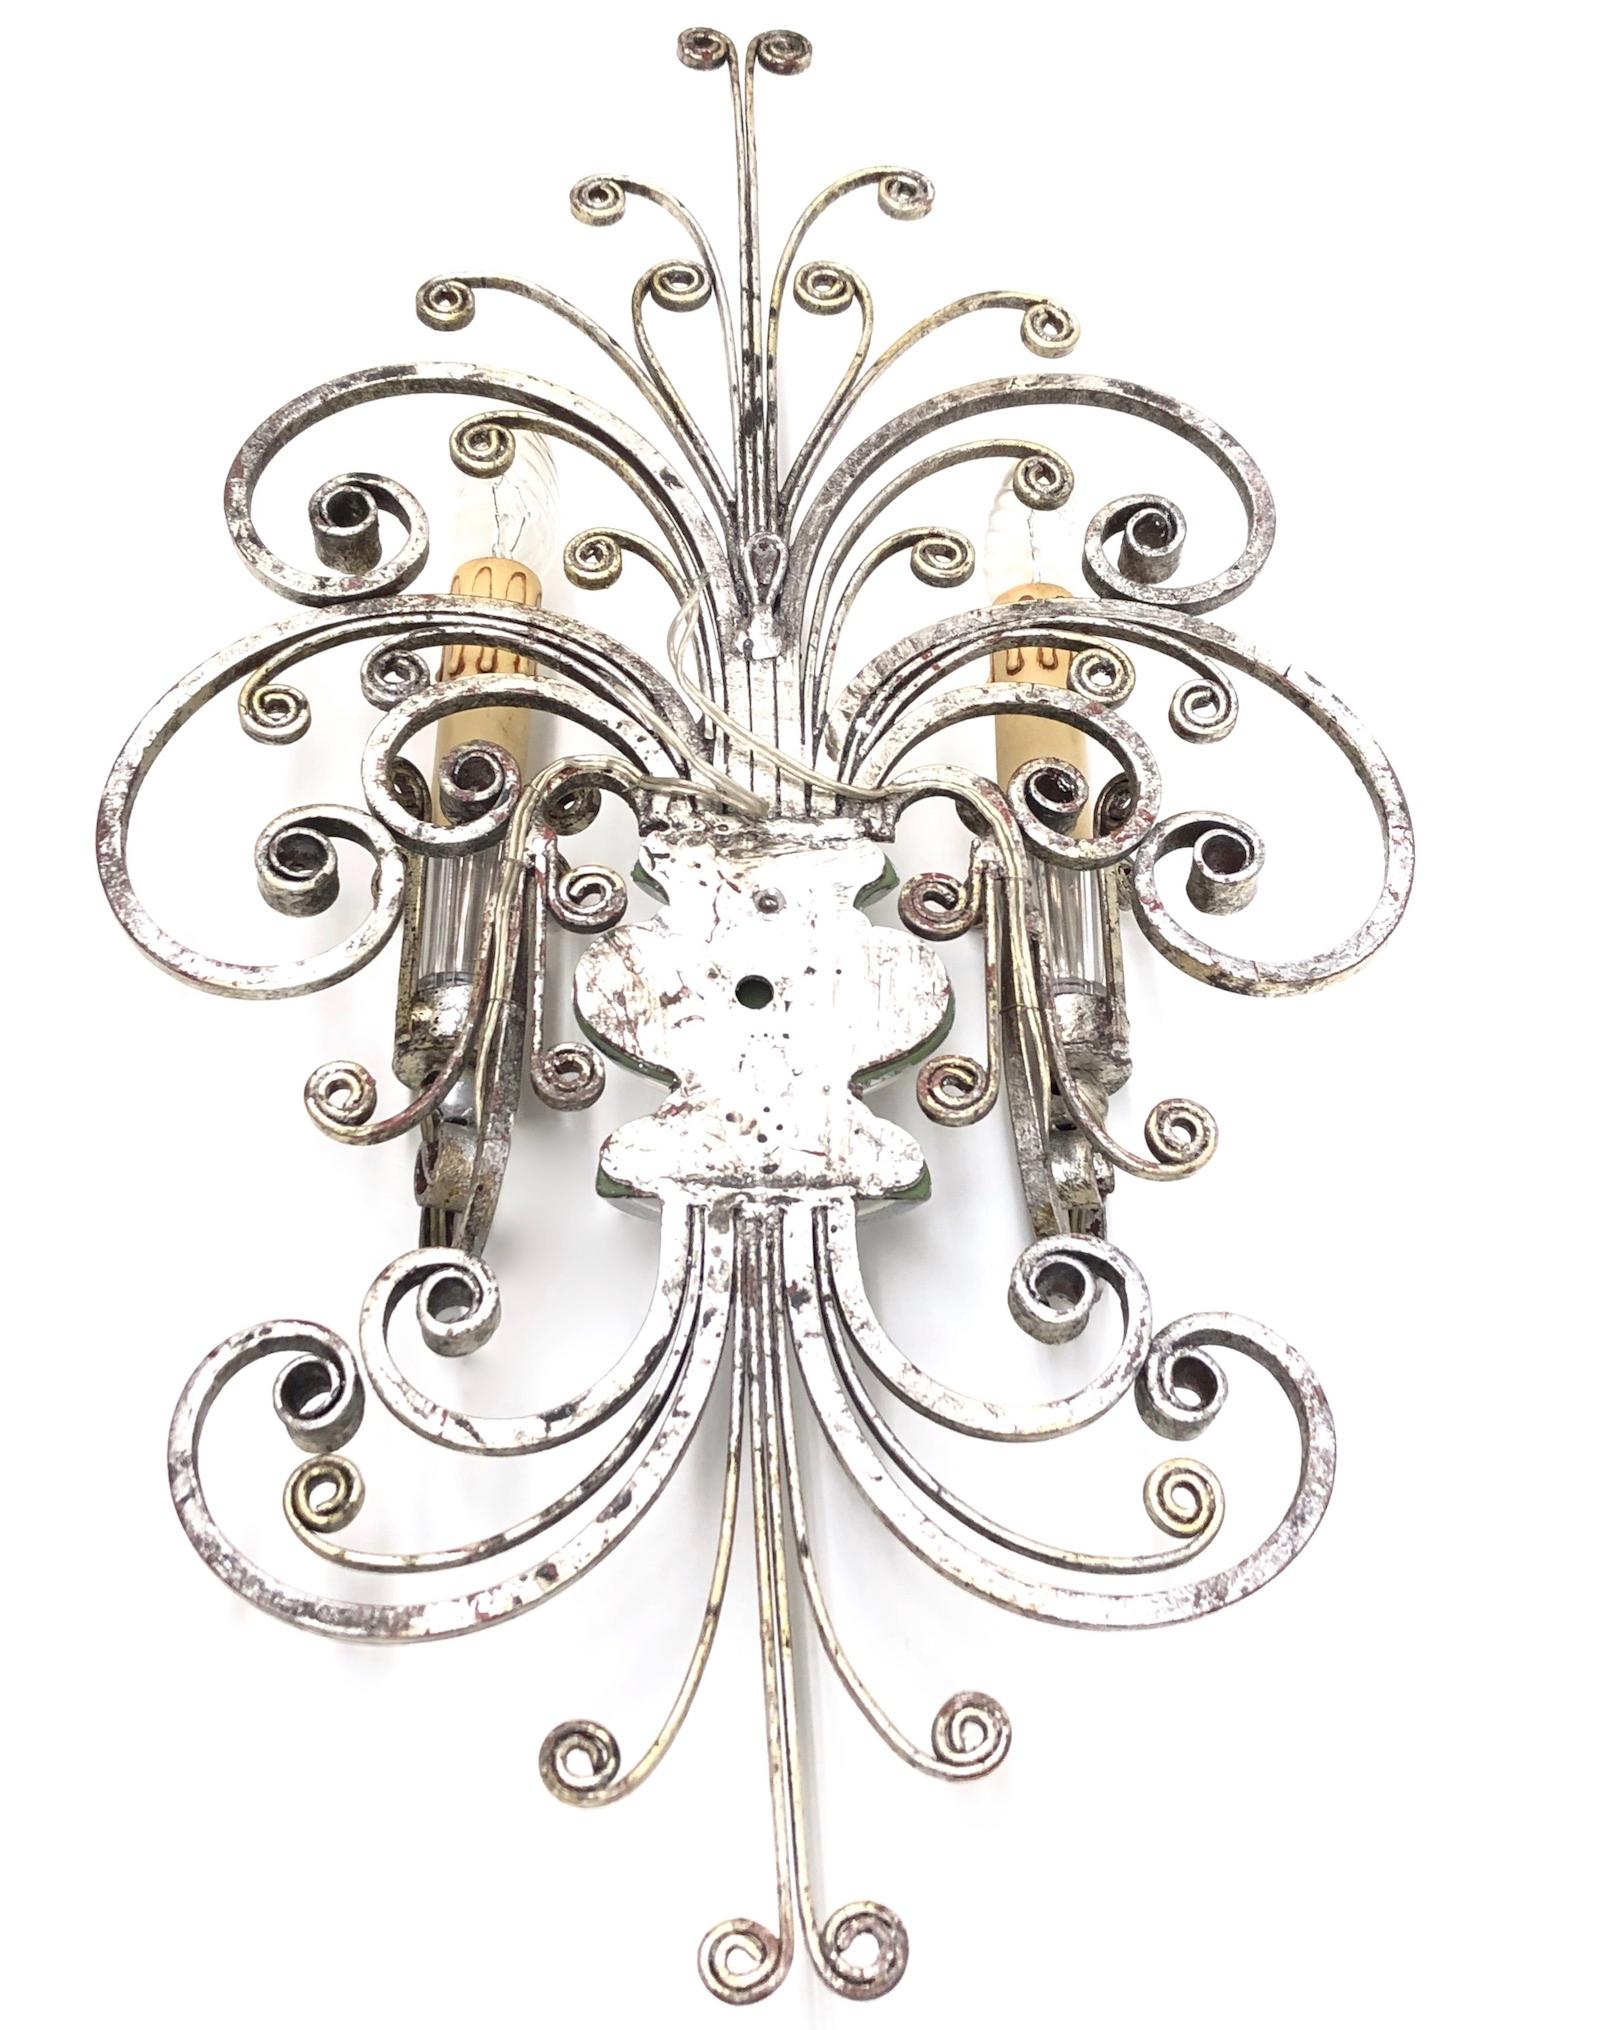 Single monumental Italian Crystal Urn Motif Flower Wall Sconce by Banci Florence For Sale 2